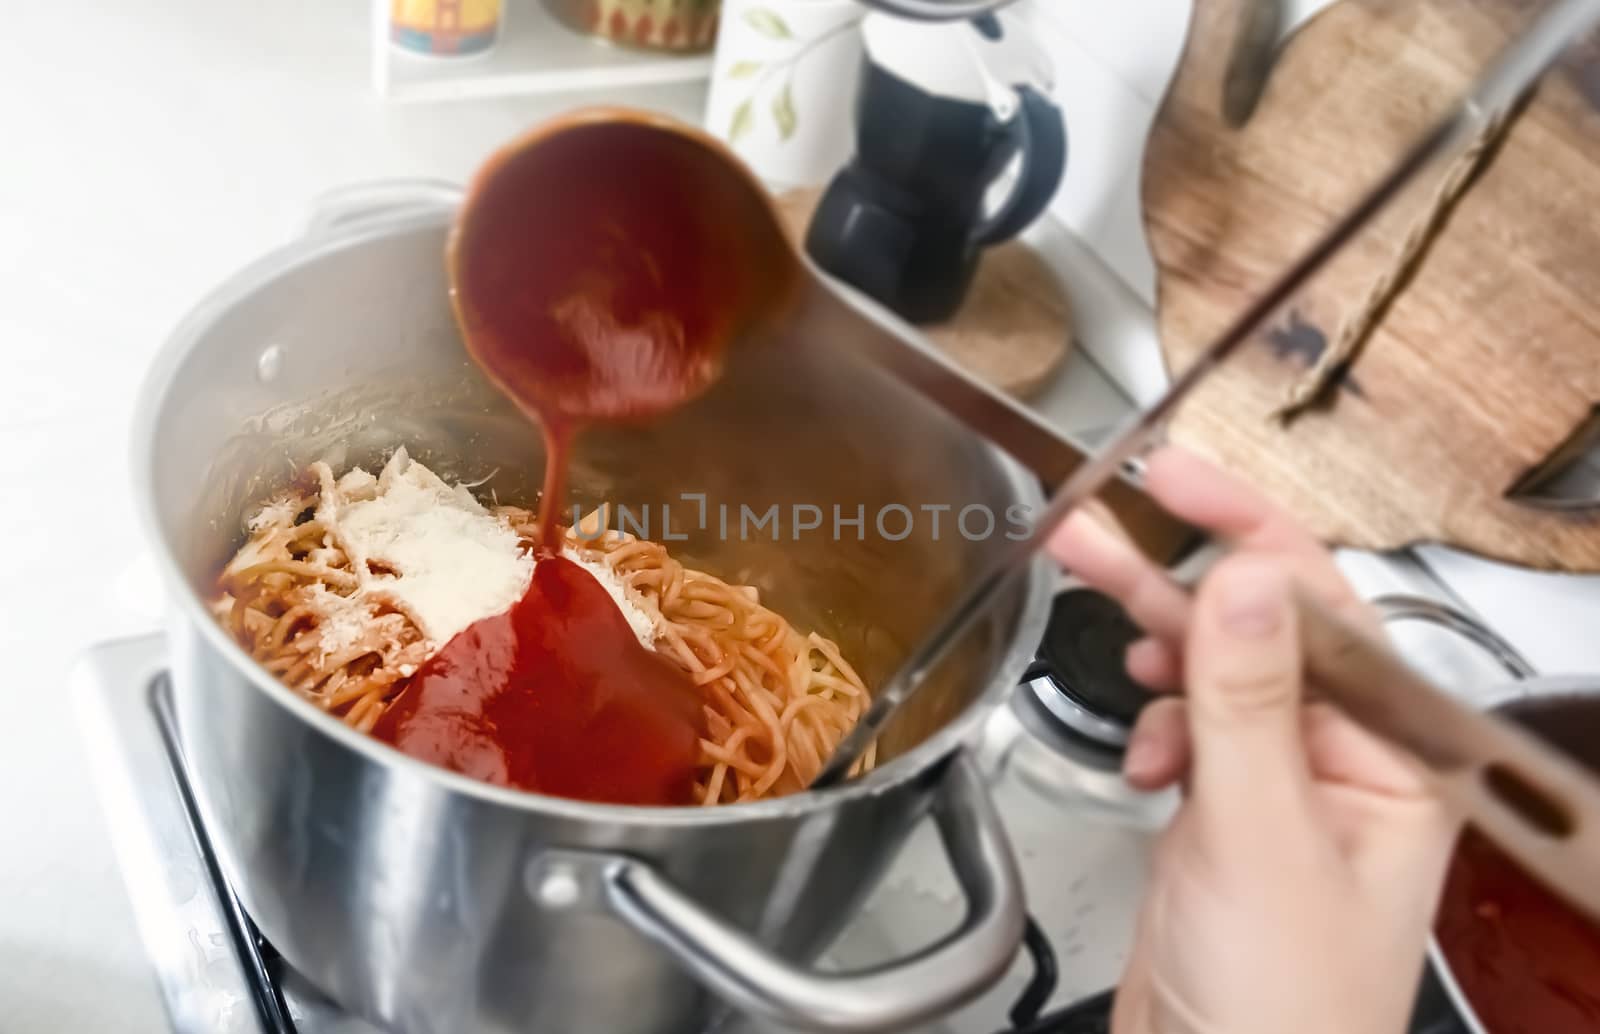 Seasoning a pan full of freshly cooked spaghetti by pouring the tomato sauce with a steel ladle. Italian home cooking.